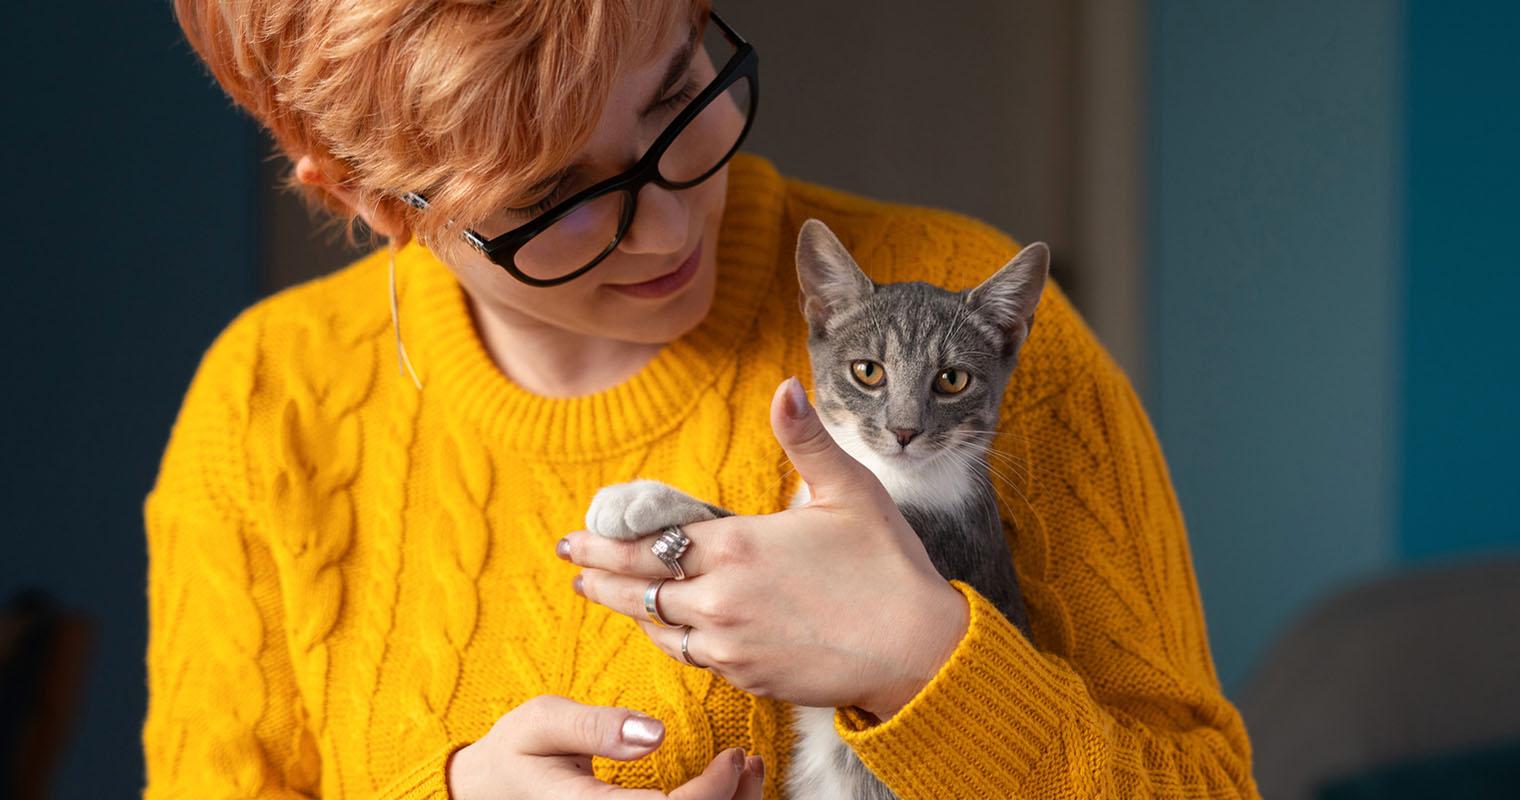 How to Welcome a New Cat? Your New Cat’s First Day